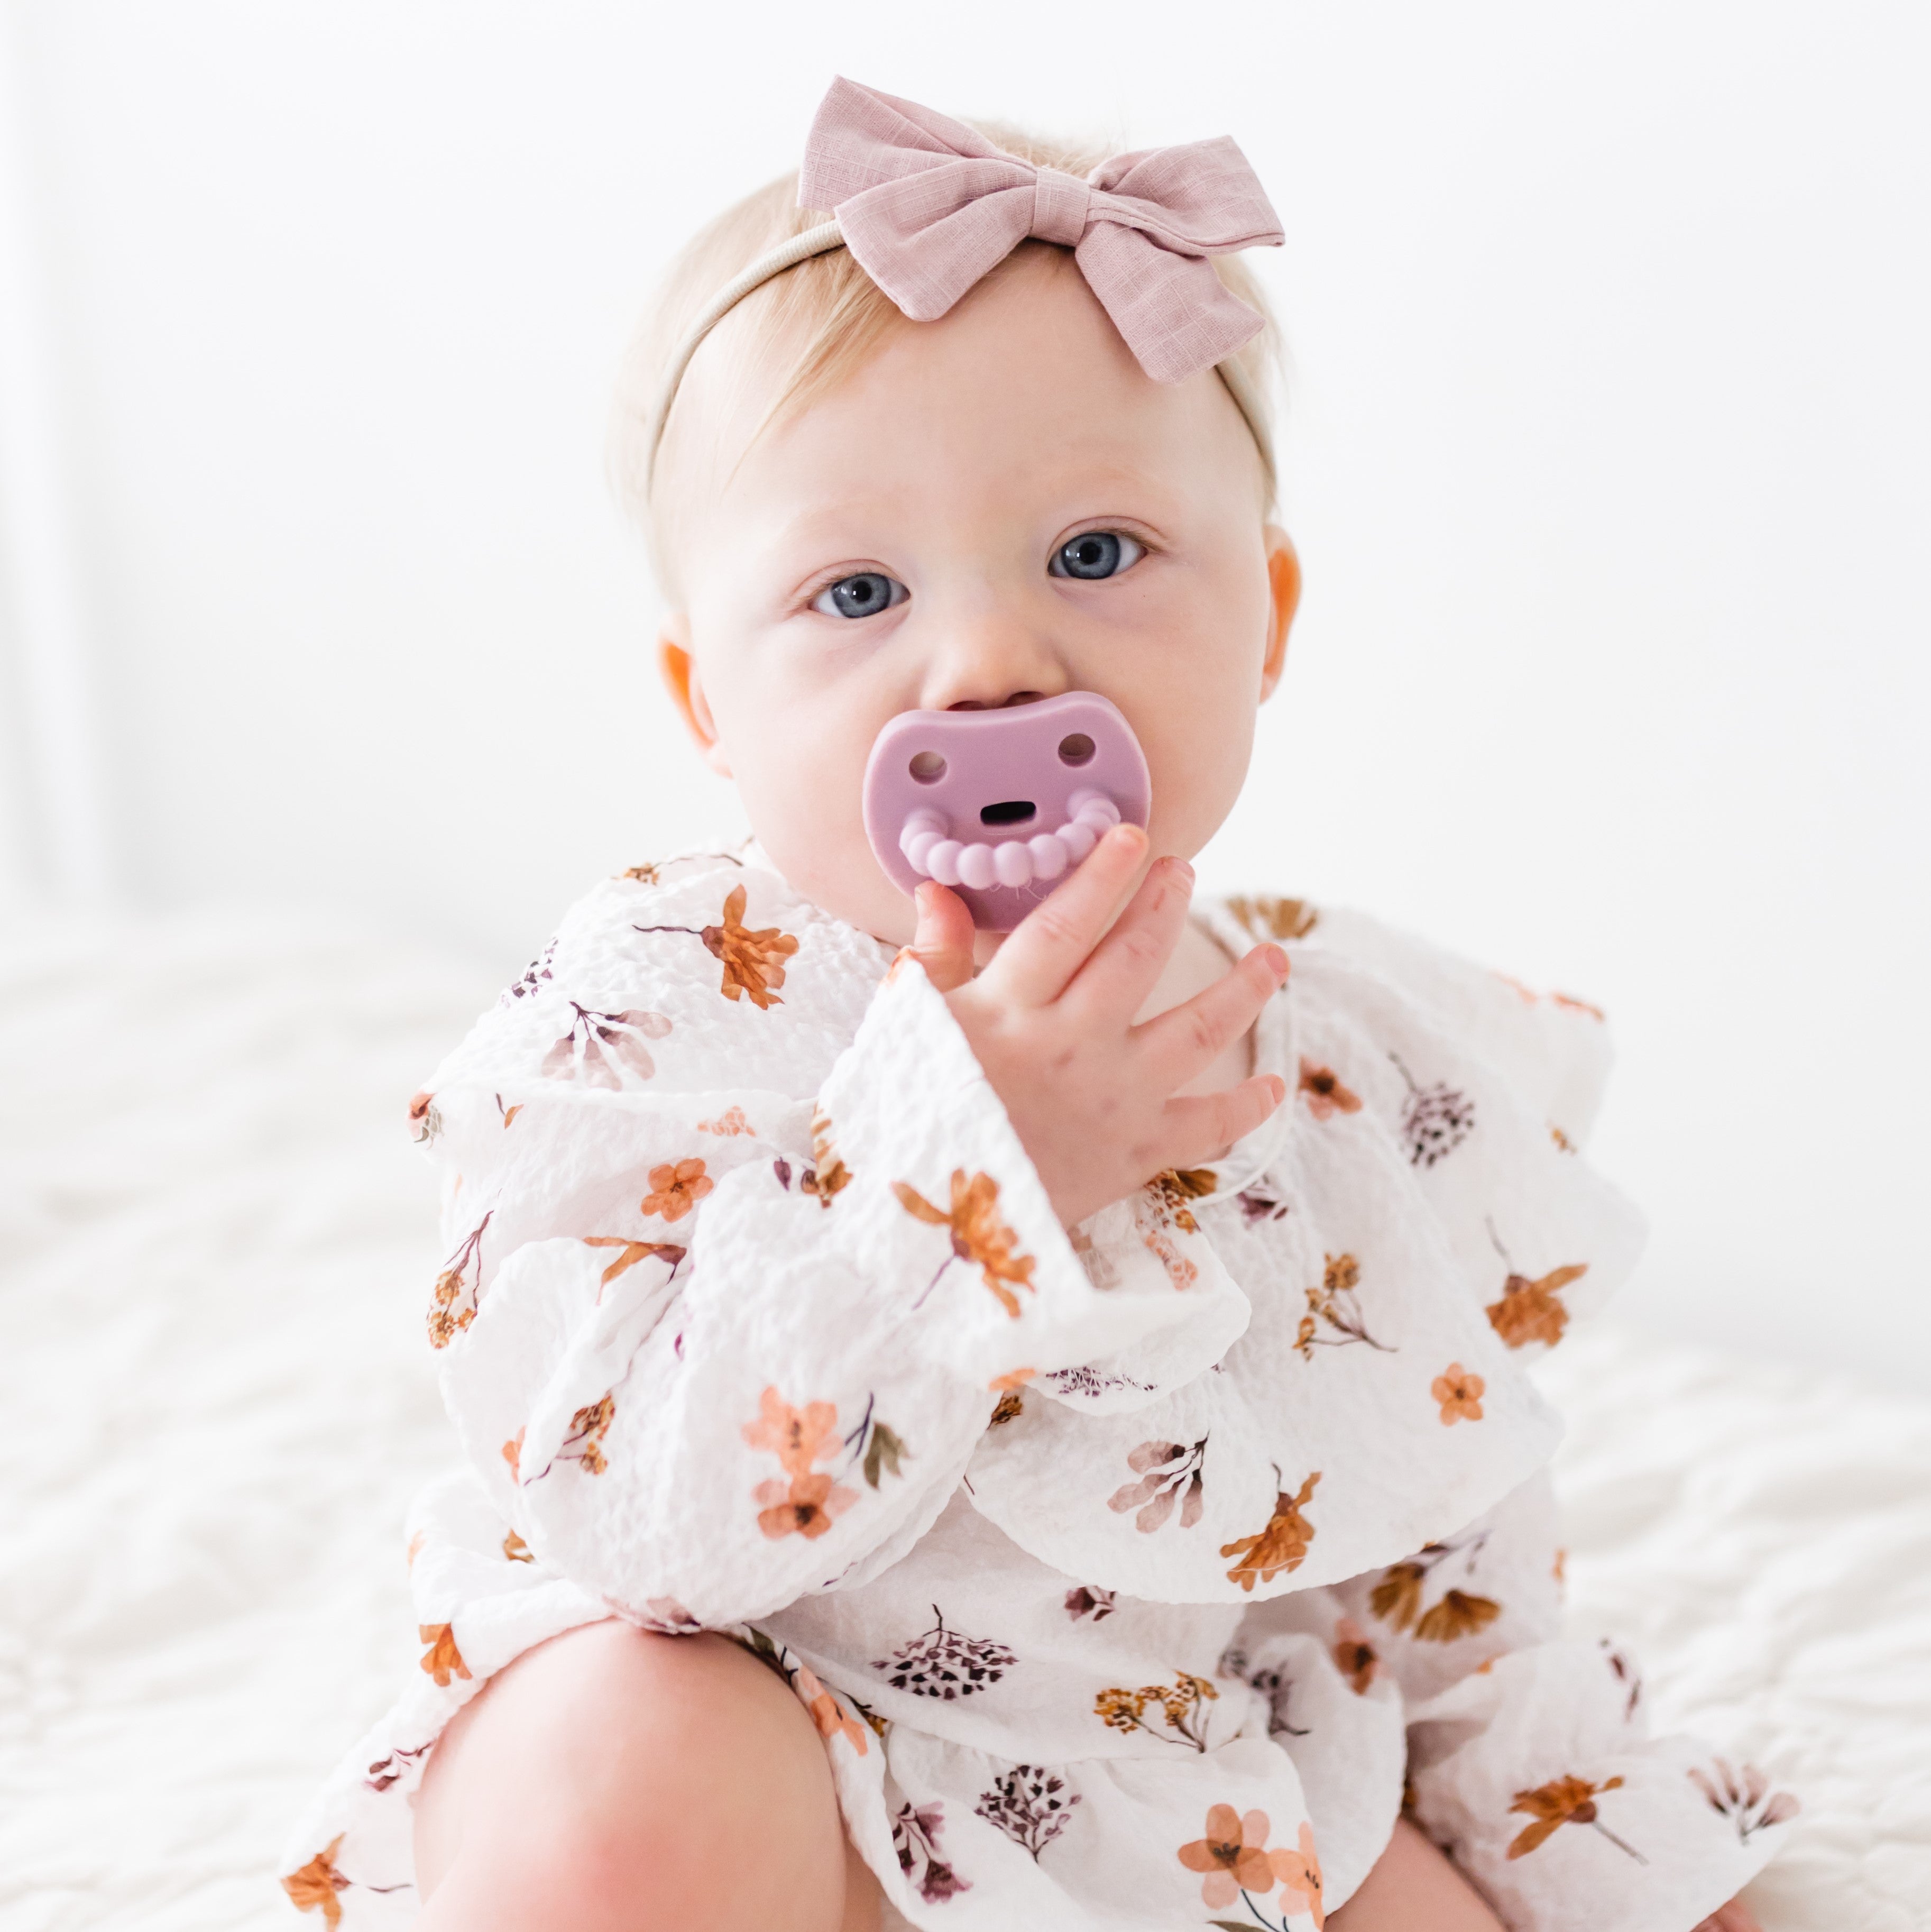 Baby sucking on a Cutie PAT Smile pacifier.